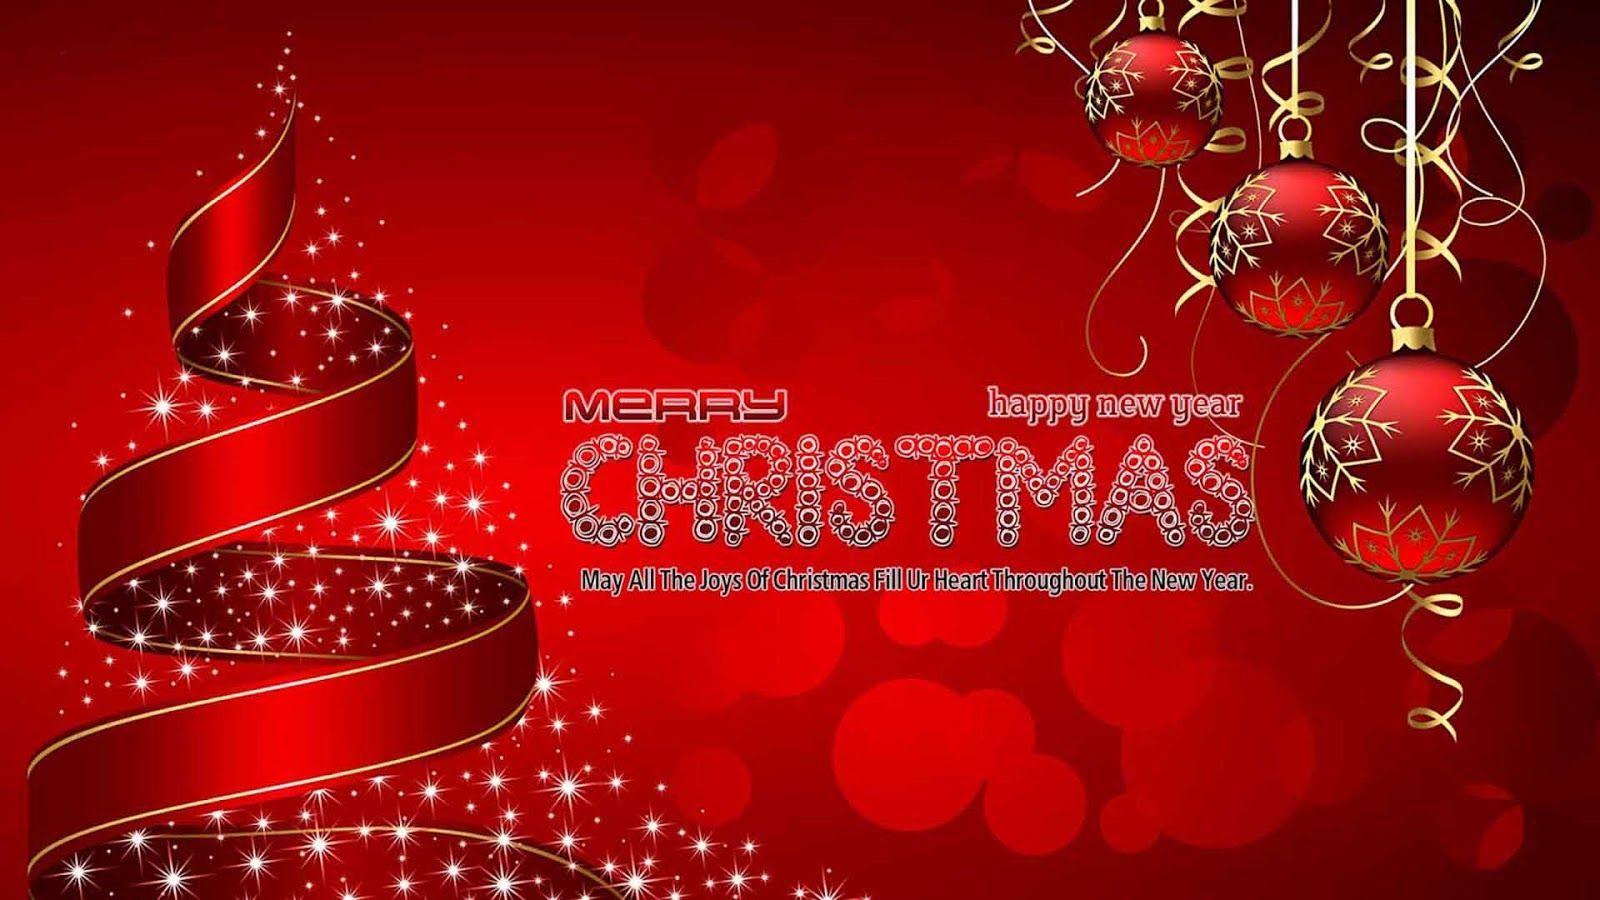 Merry Christmas And Happy New Year 2018 Image, Wishes & Greetings